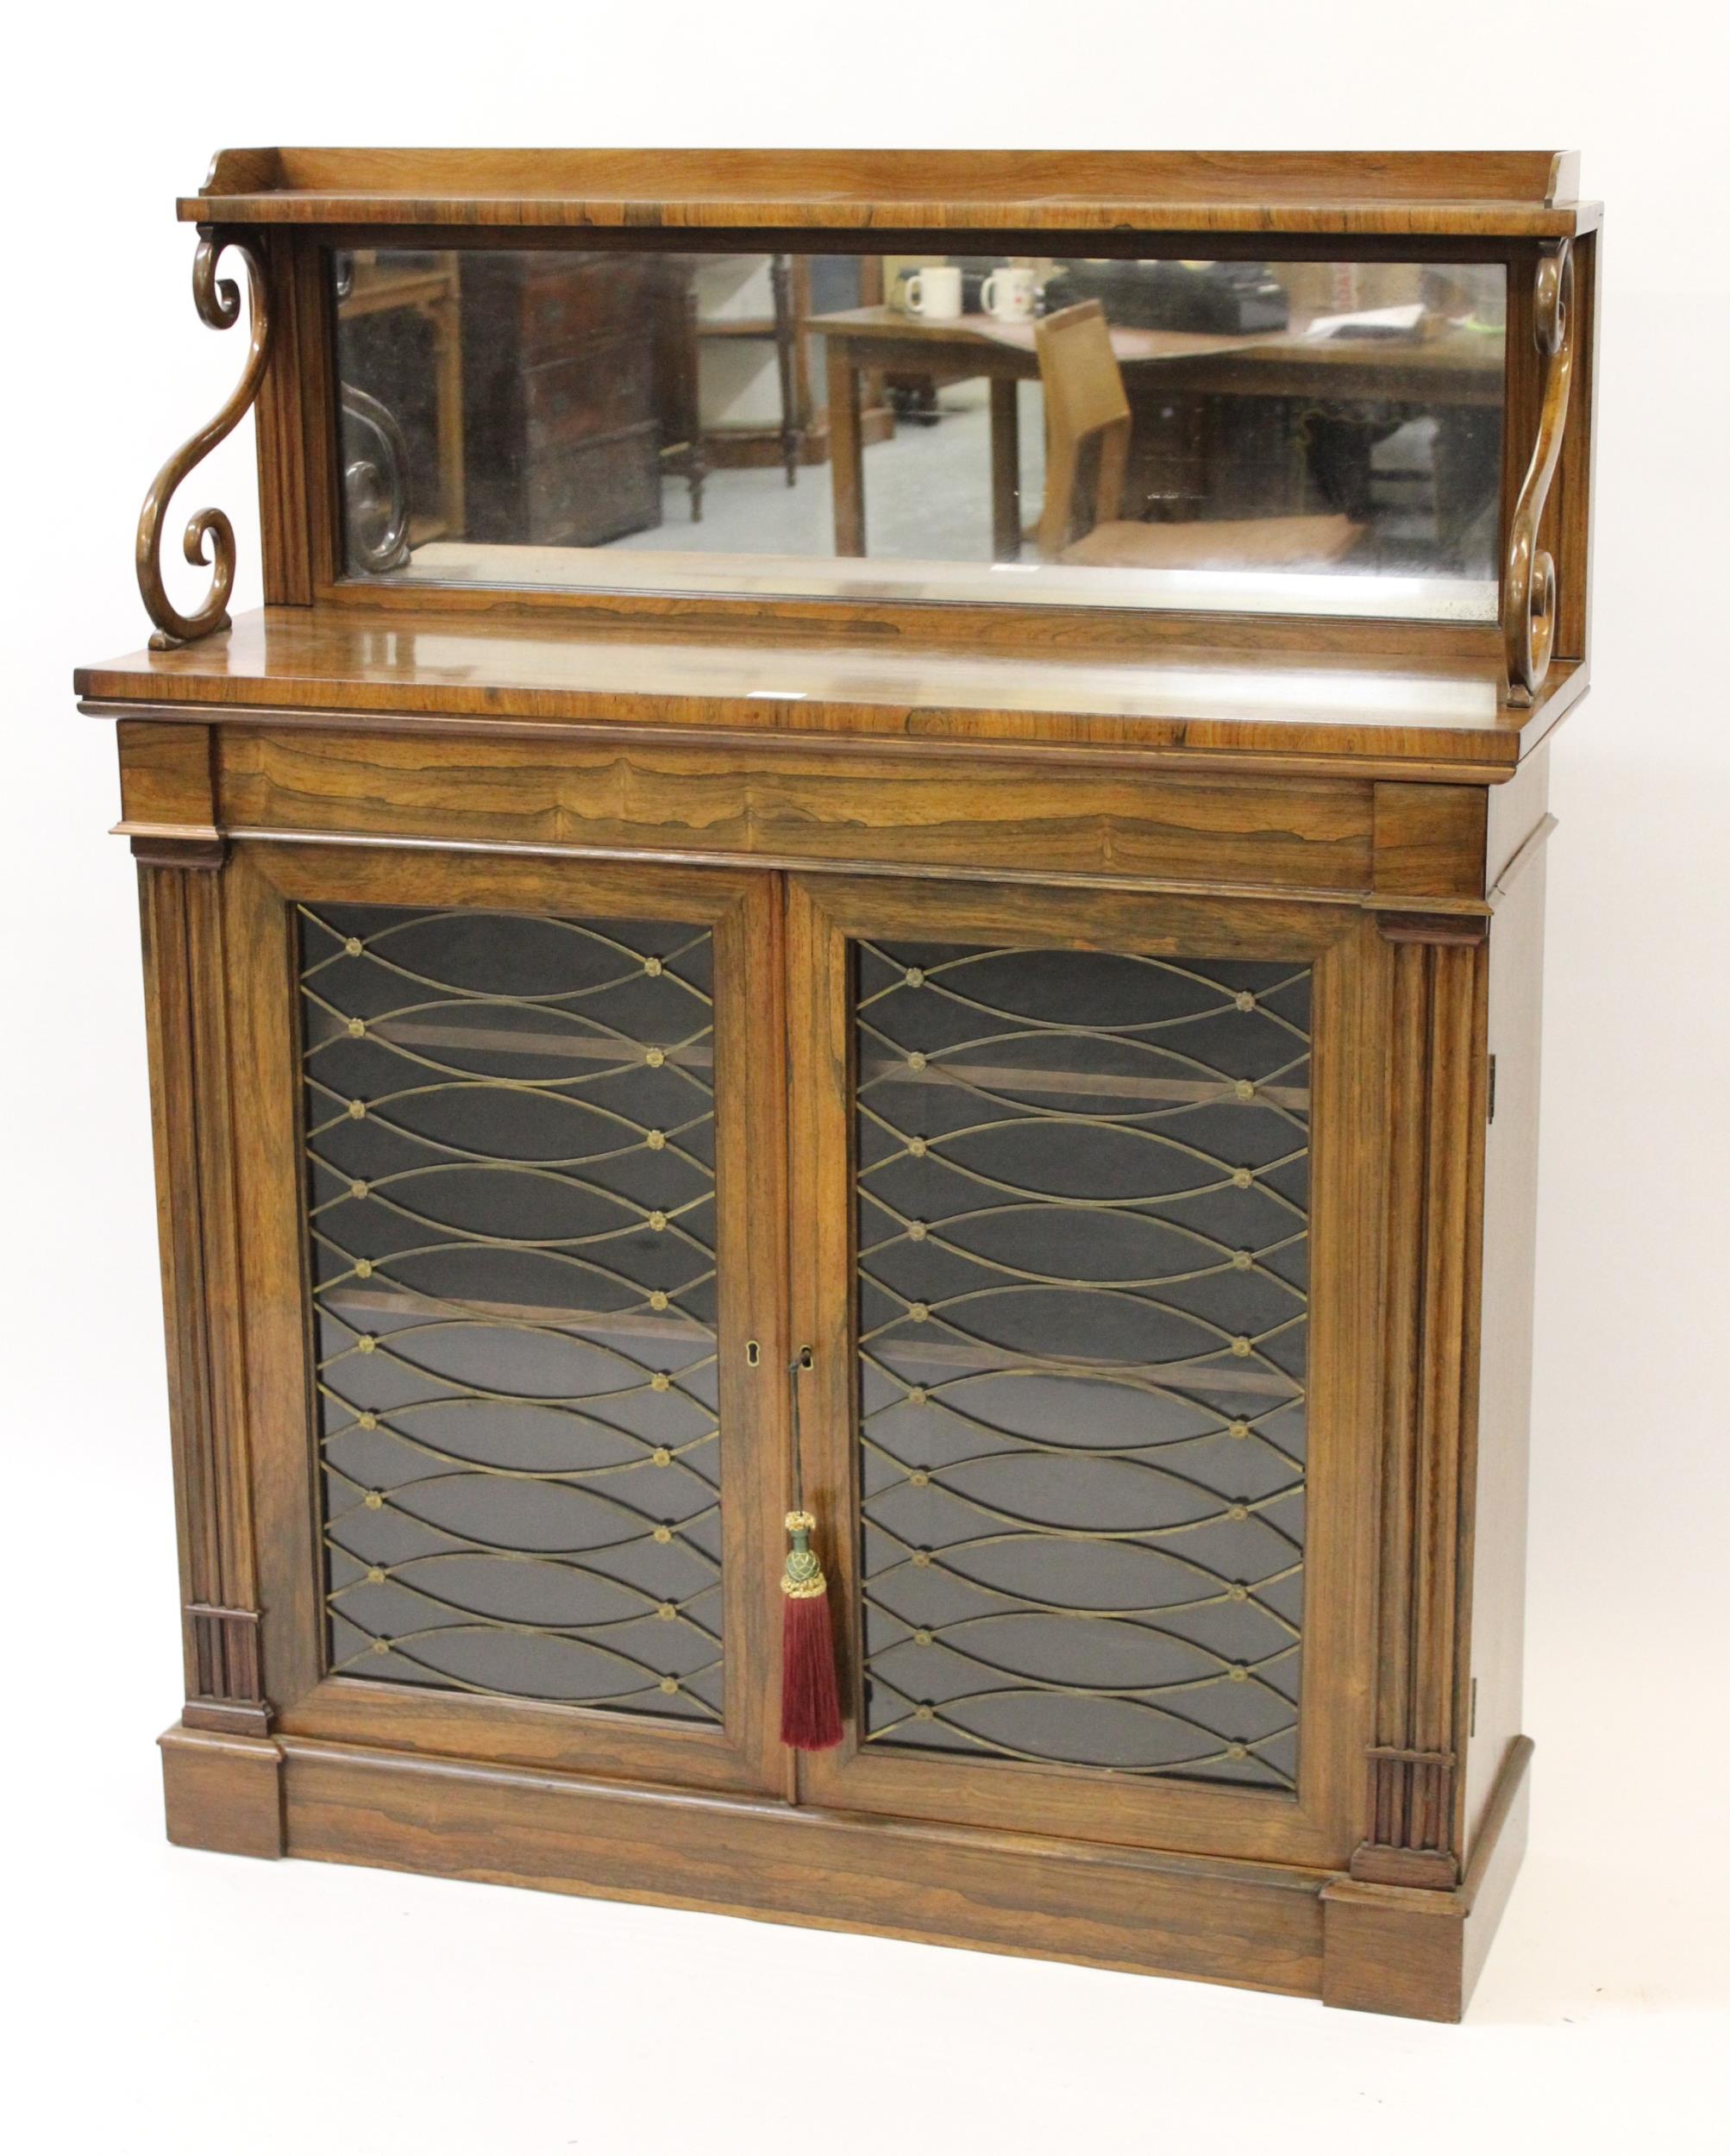 Good Regency rosewood chiffonier, the low mirrored back with scroll supports above a pair of brass